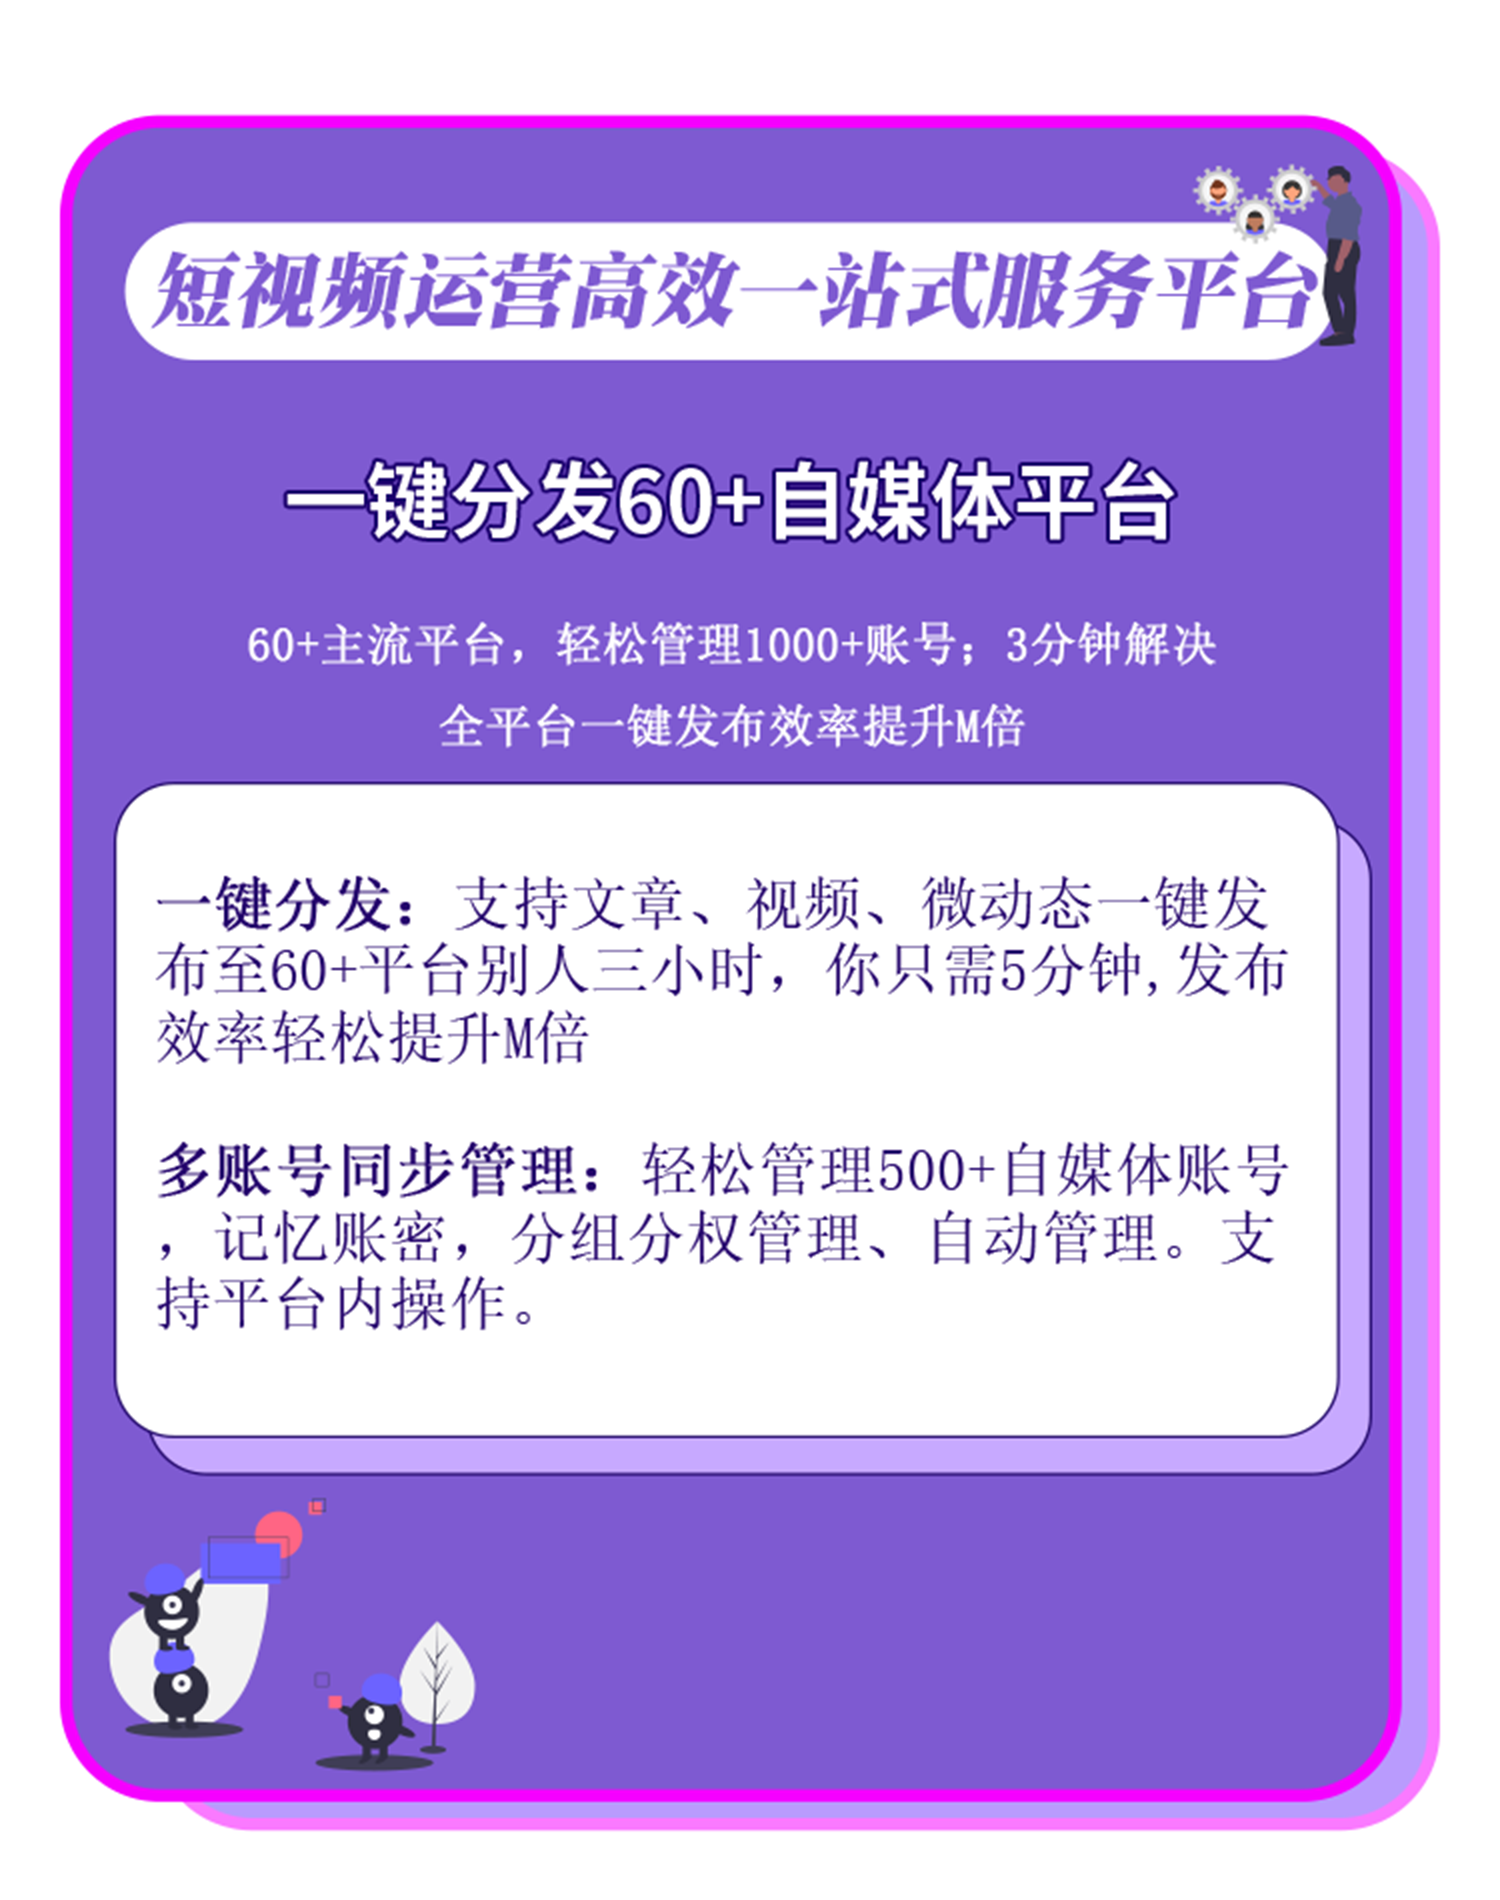 PC端图片4.png